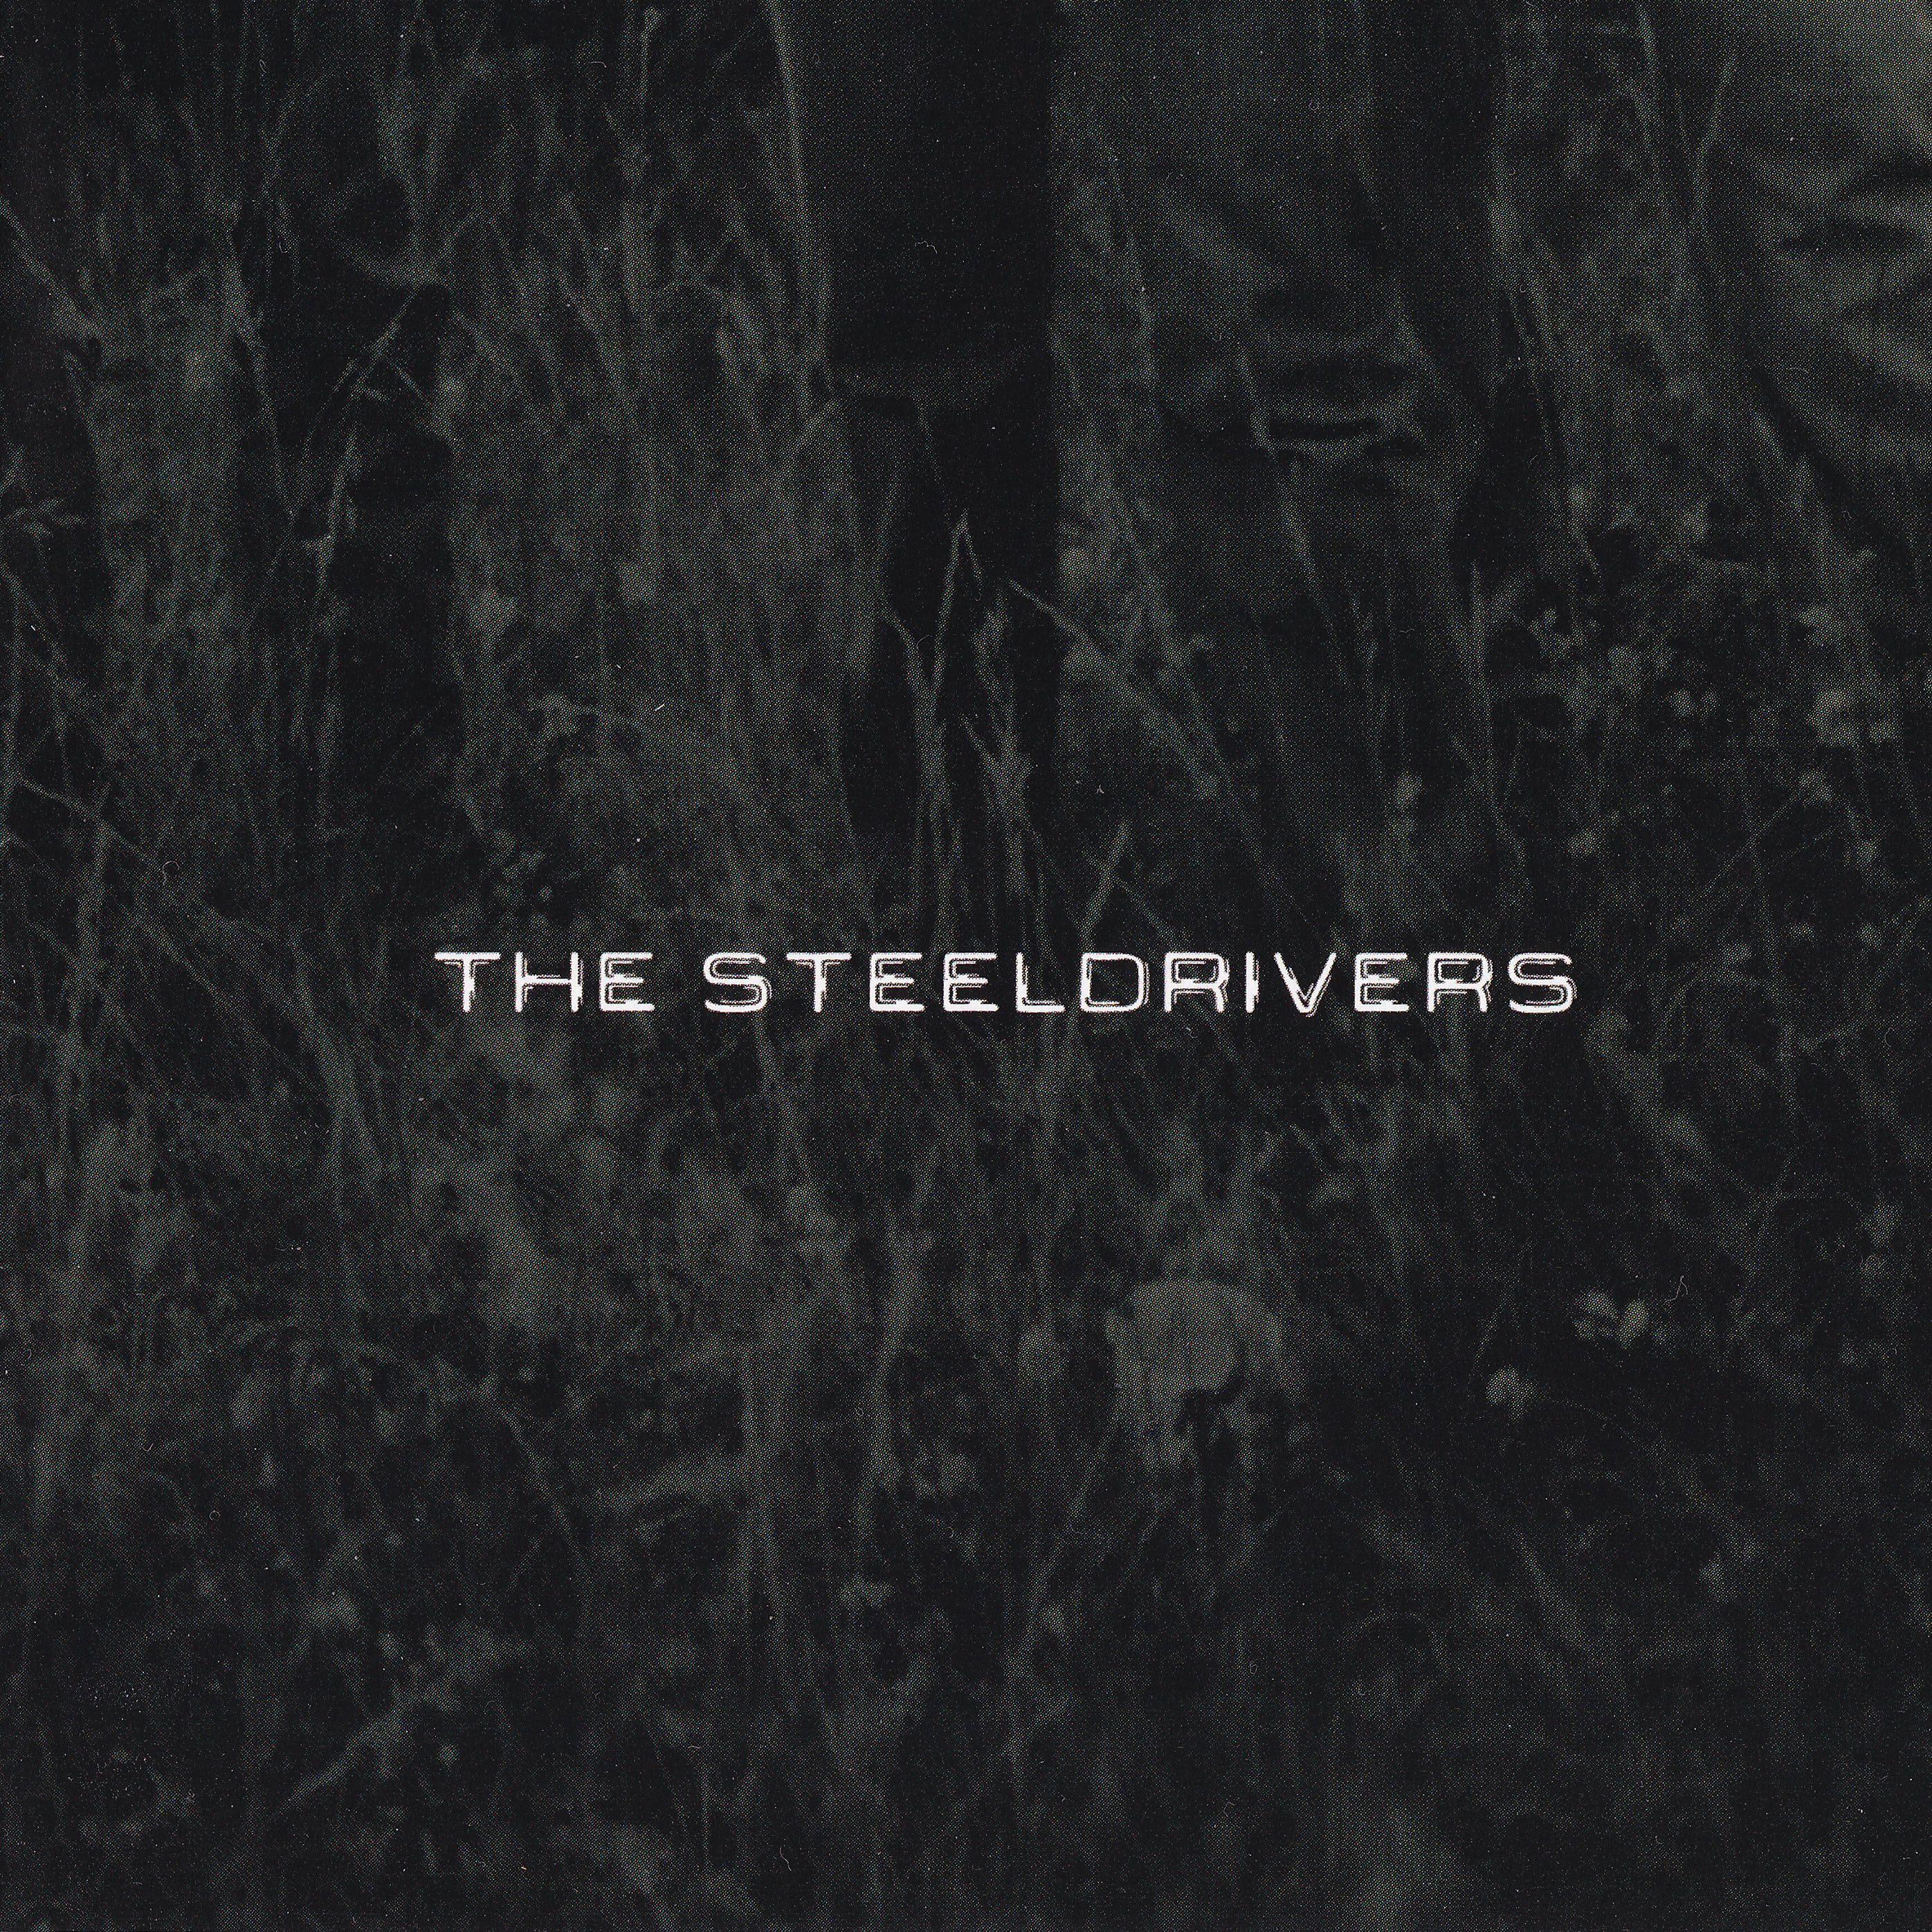 The SteelDrivers - The SteelDrivers Album Cover